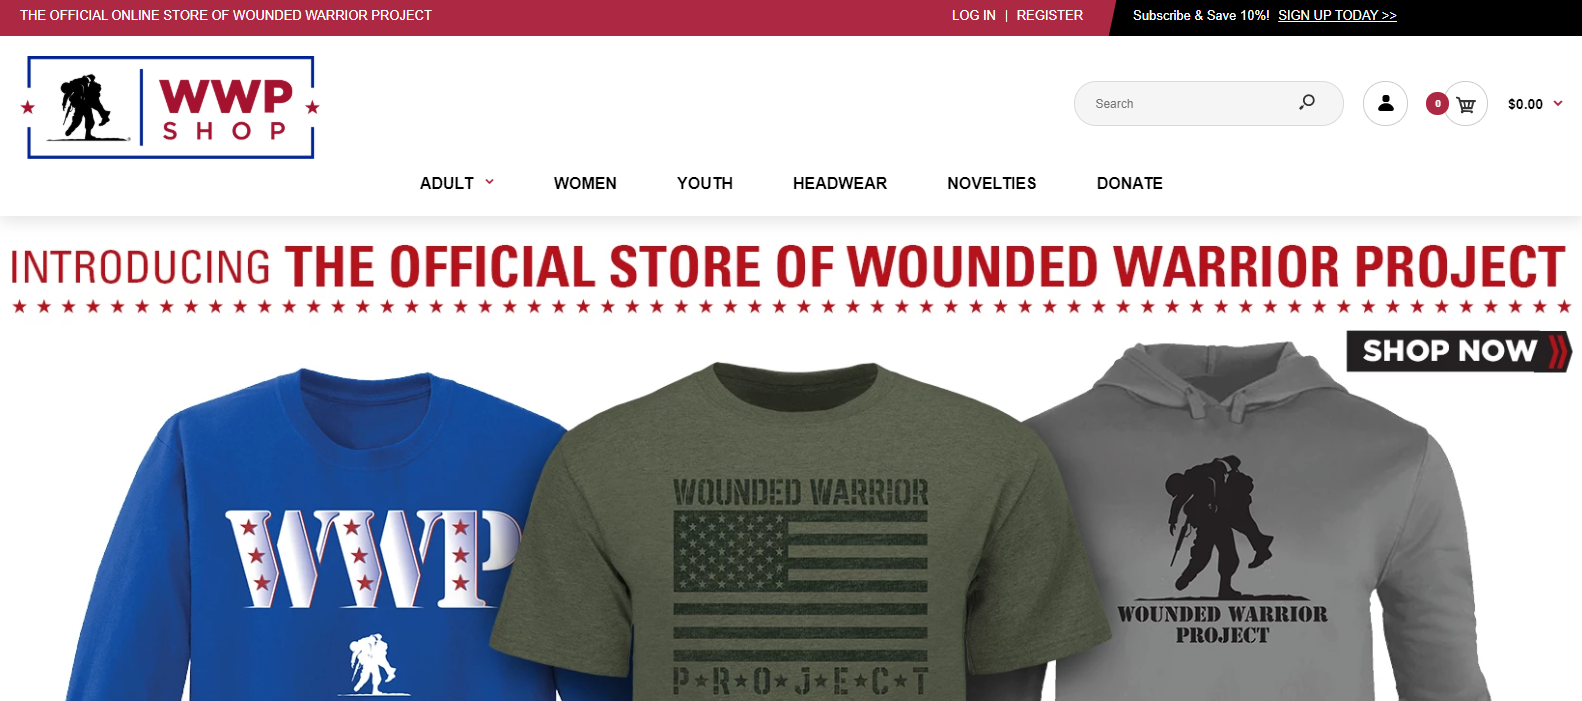 WOUNDED WARRIOR PROJECT